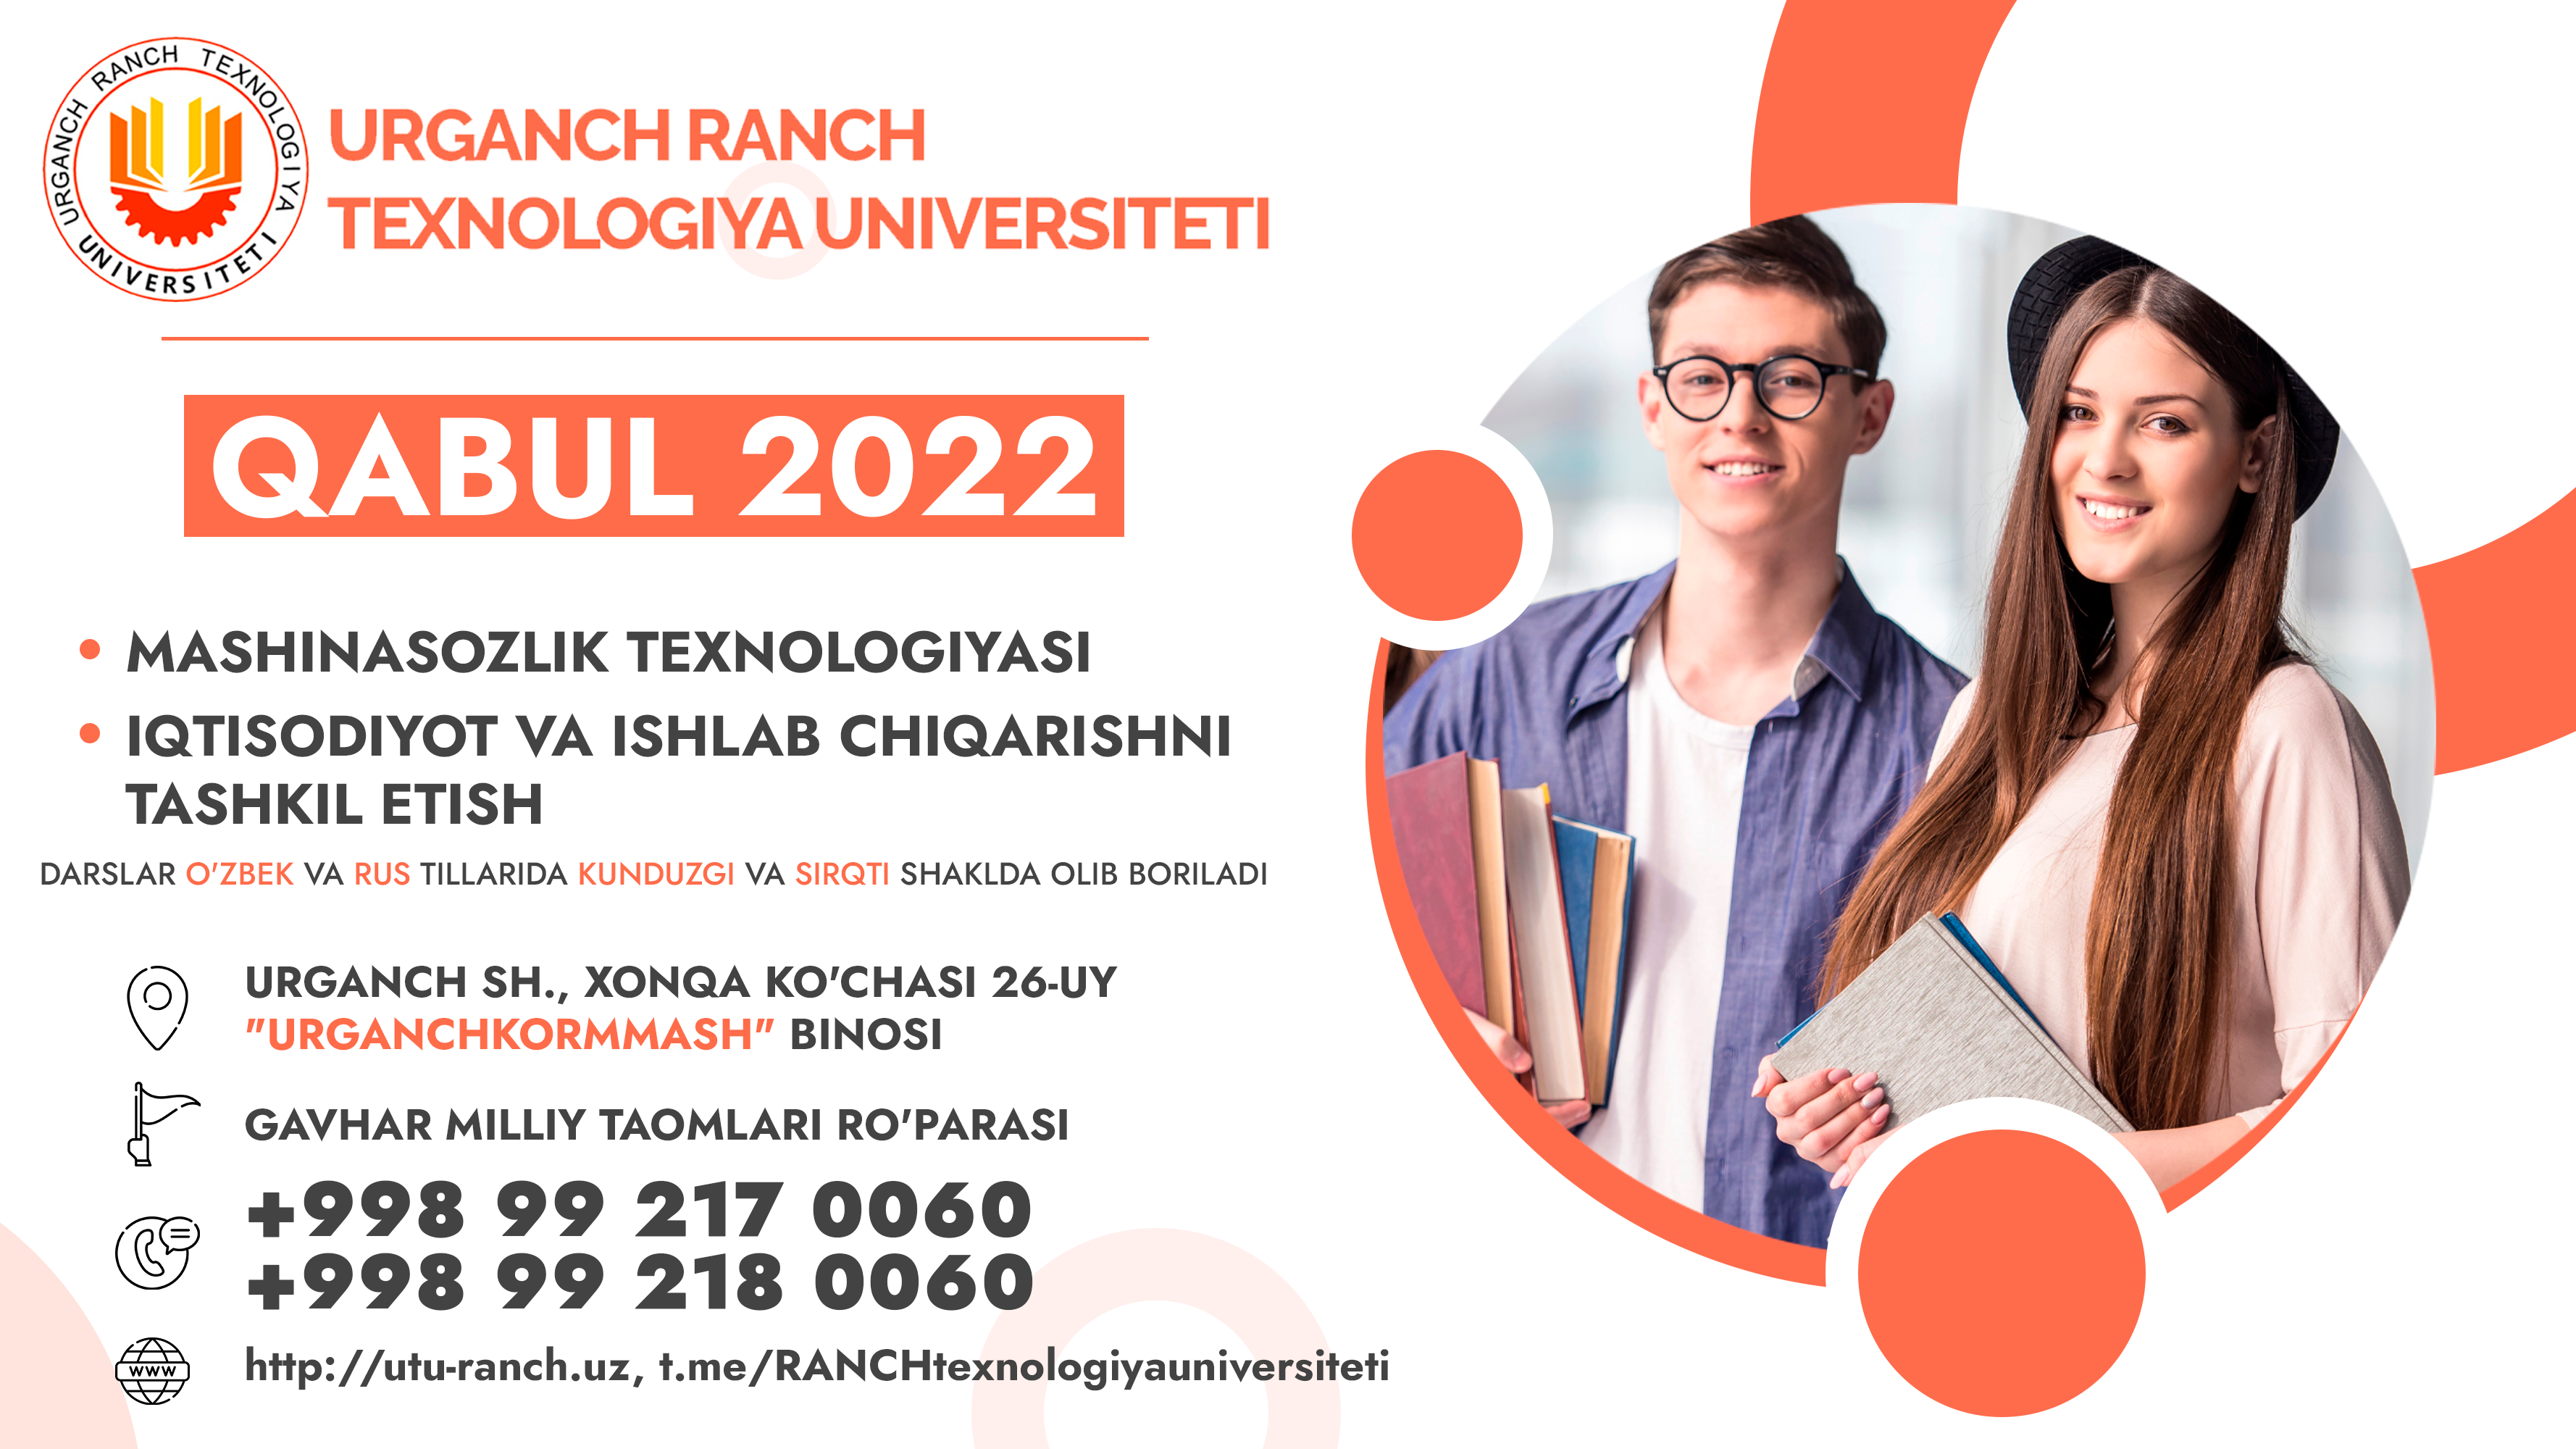 Admission of students to Urgench RANCH University of Technology for the 2022-2023 academic year has begun